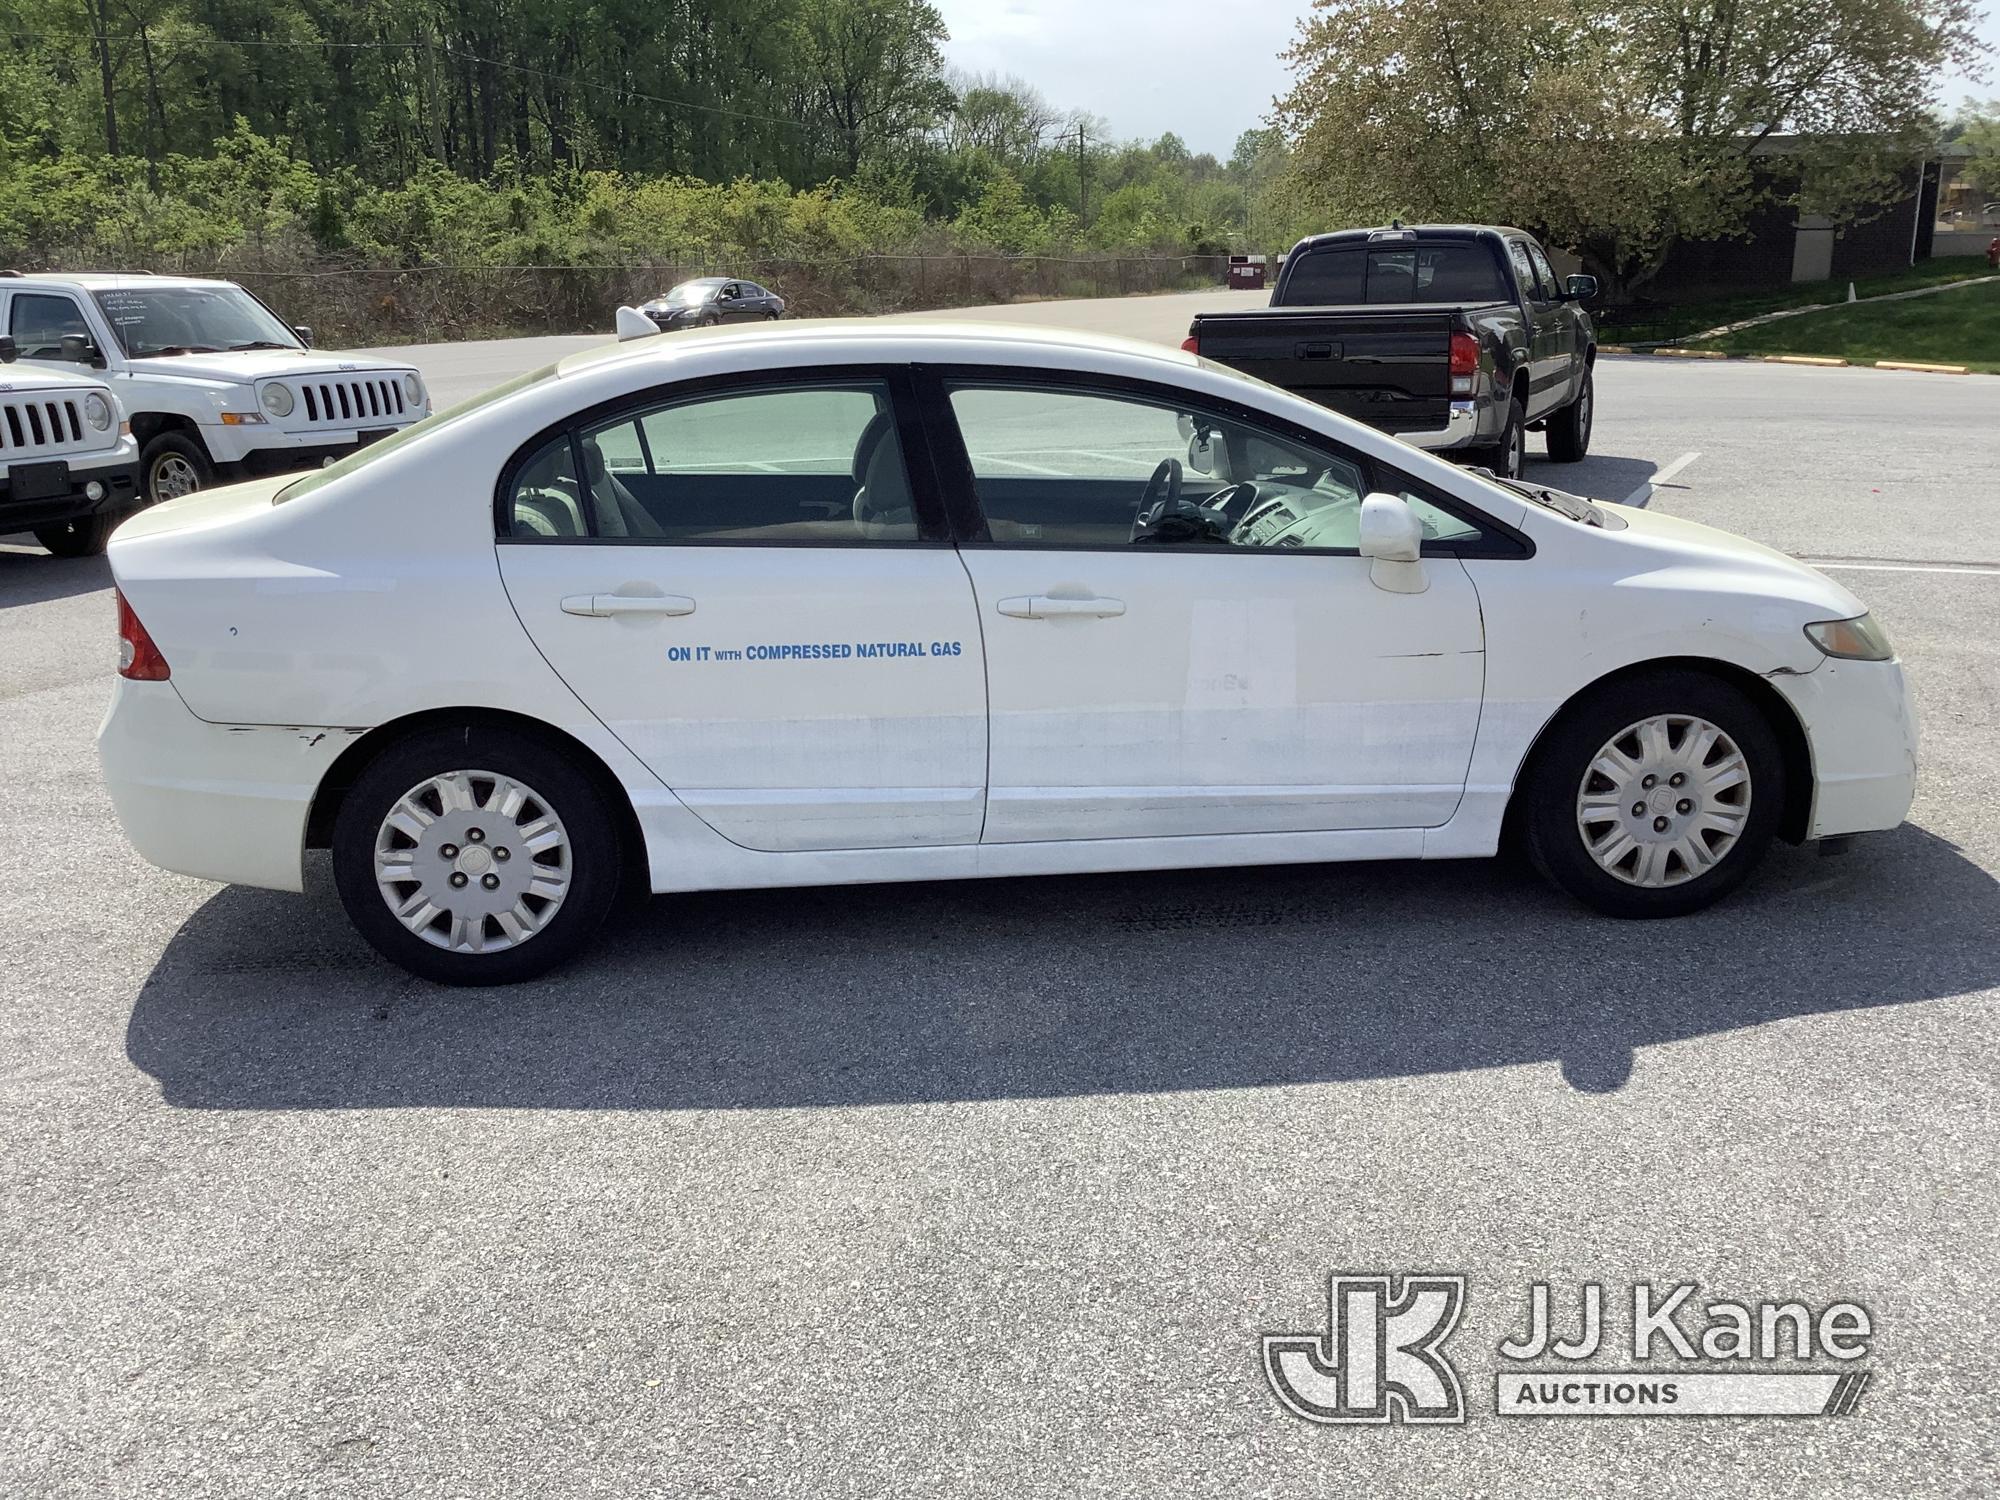 (Chester Springs, PA) 2009 Honda Civic 4-Door Sedan CNG Only) (Runs & Moves, Rust & Body Damage) (In